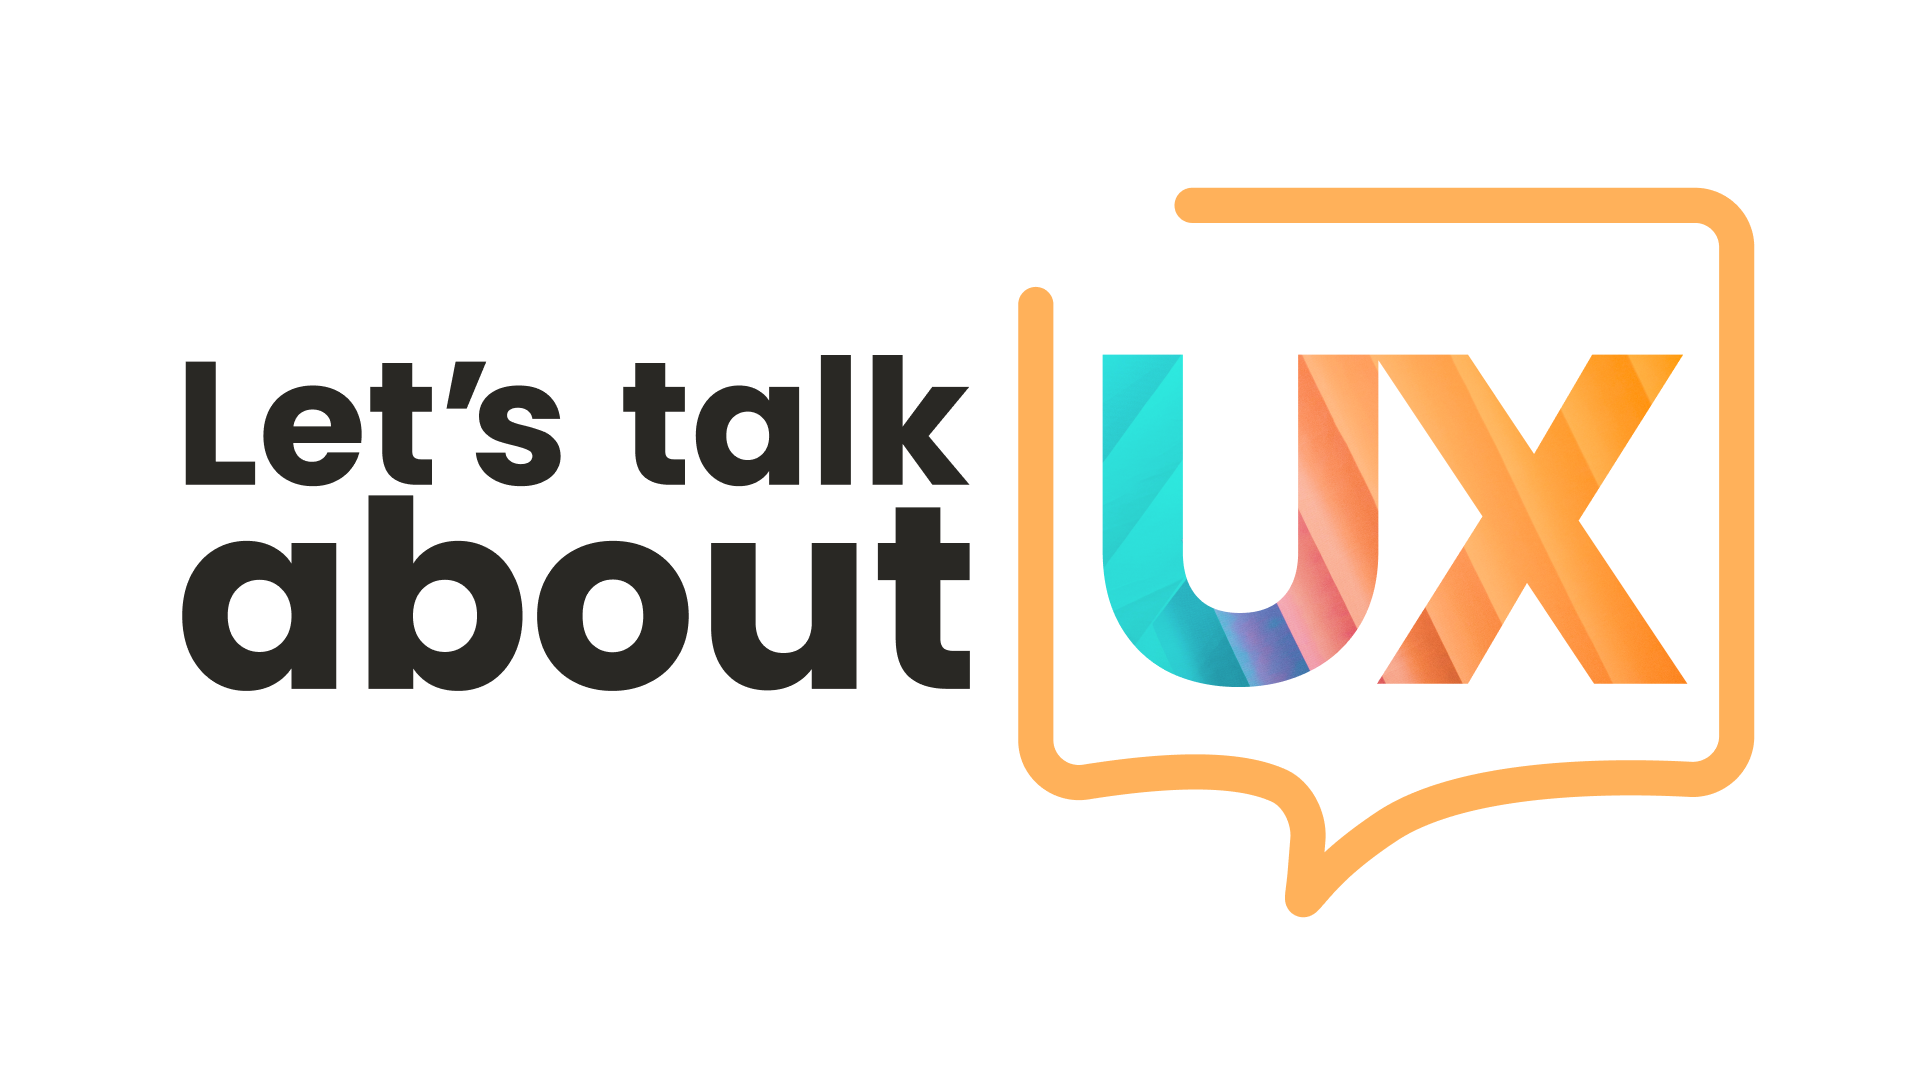 An image with the logo from Let's talk about UX